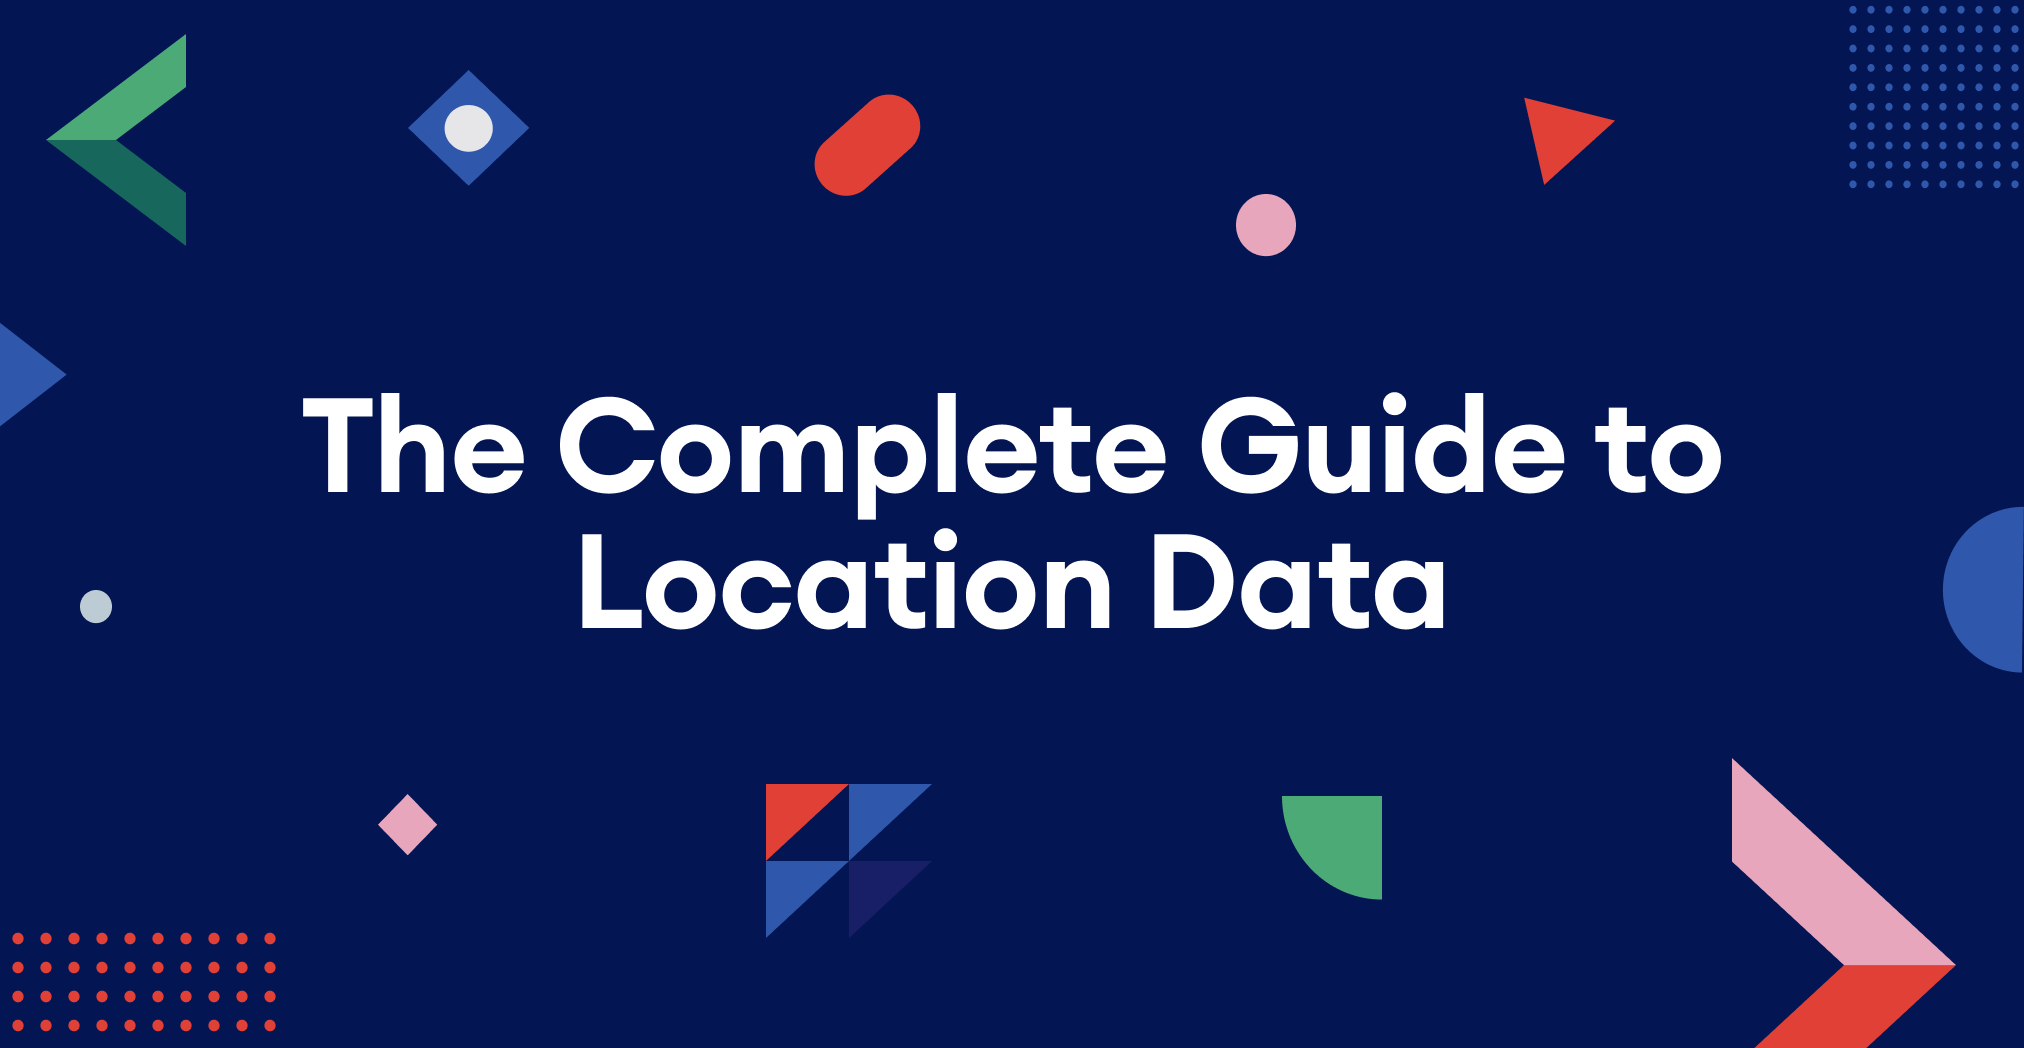 The Complete Guide to Location Data